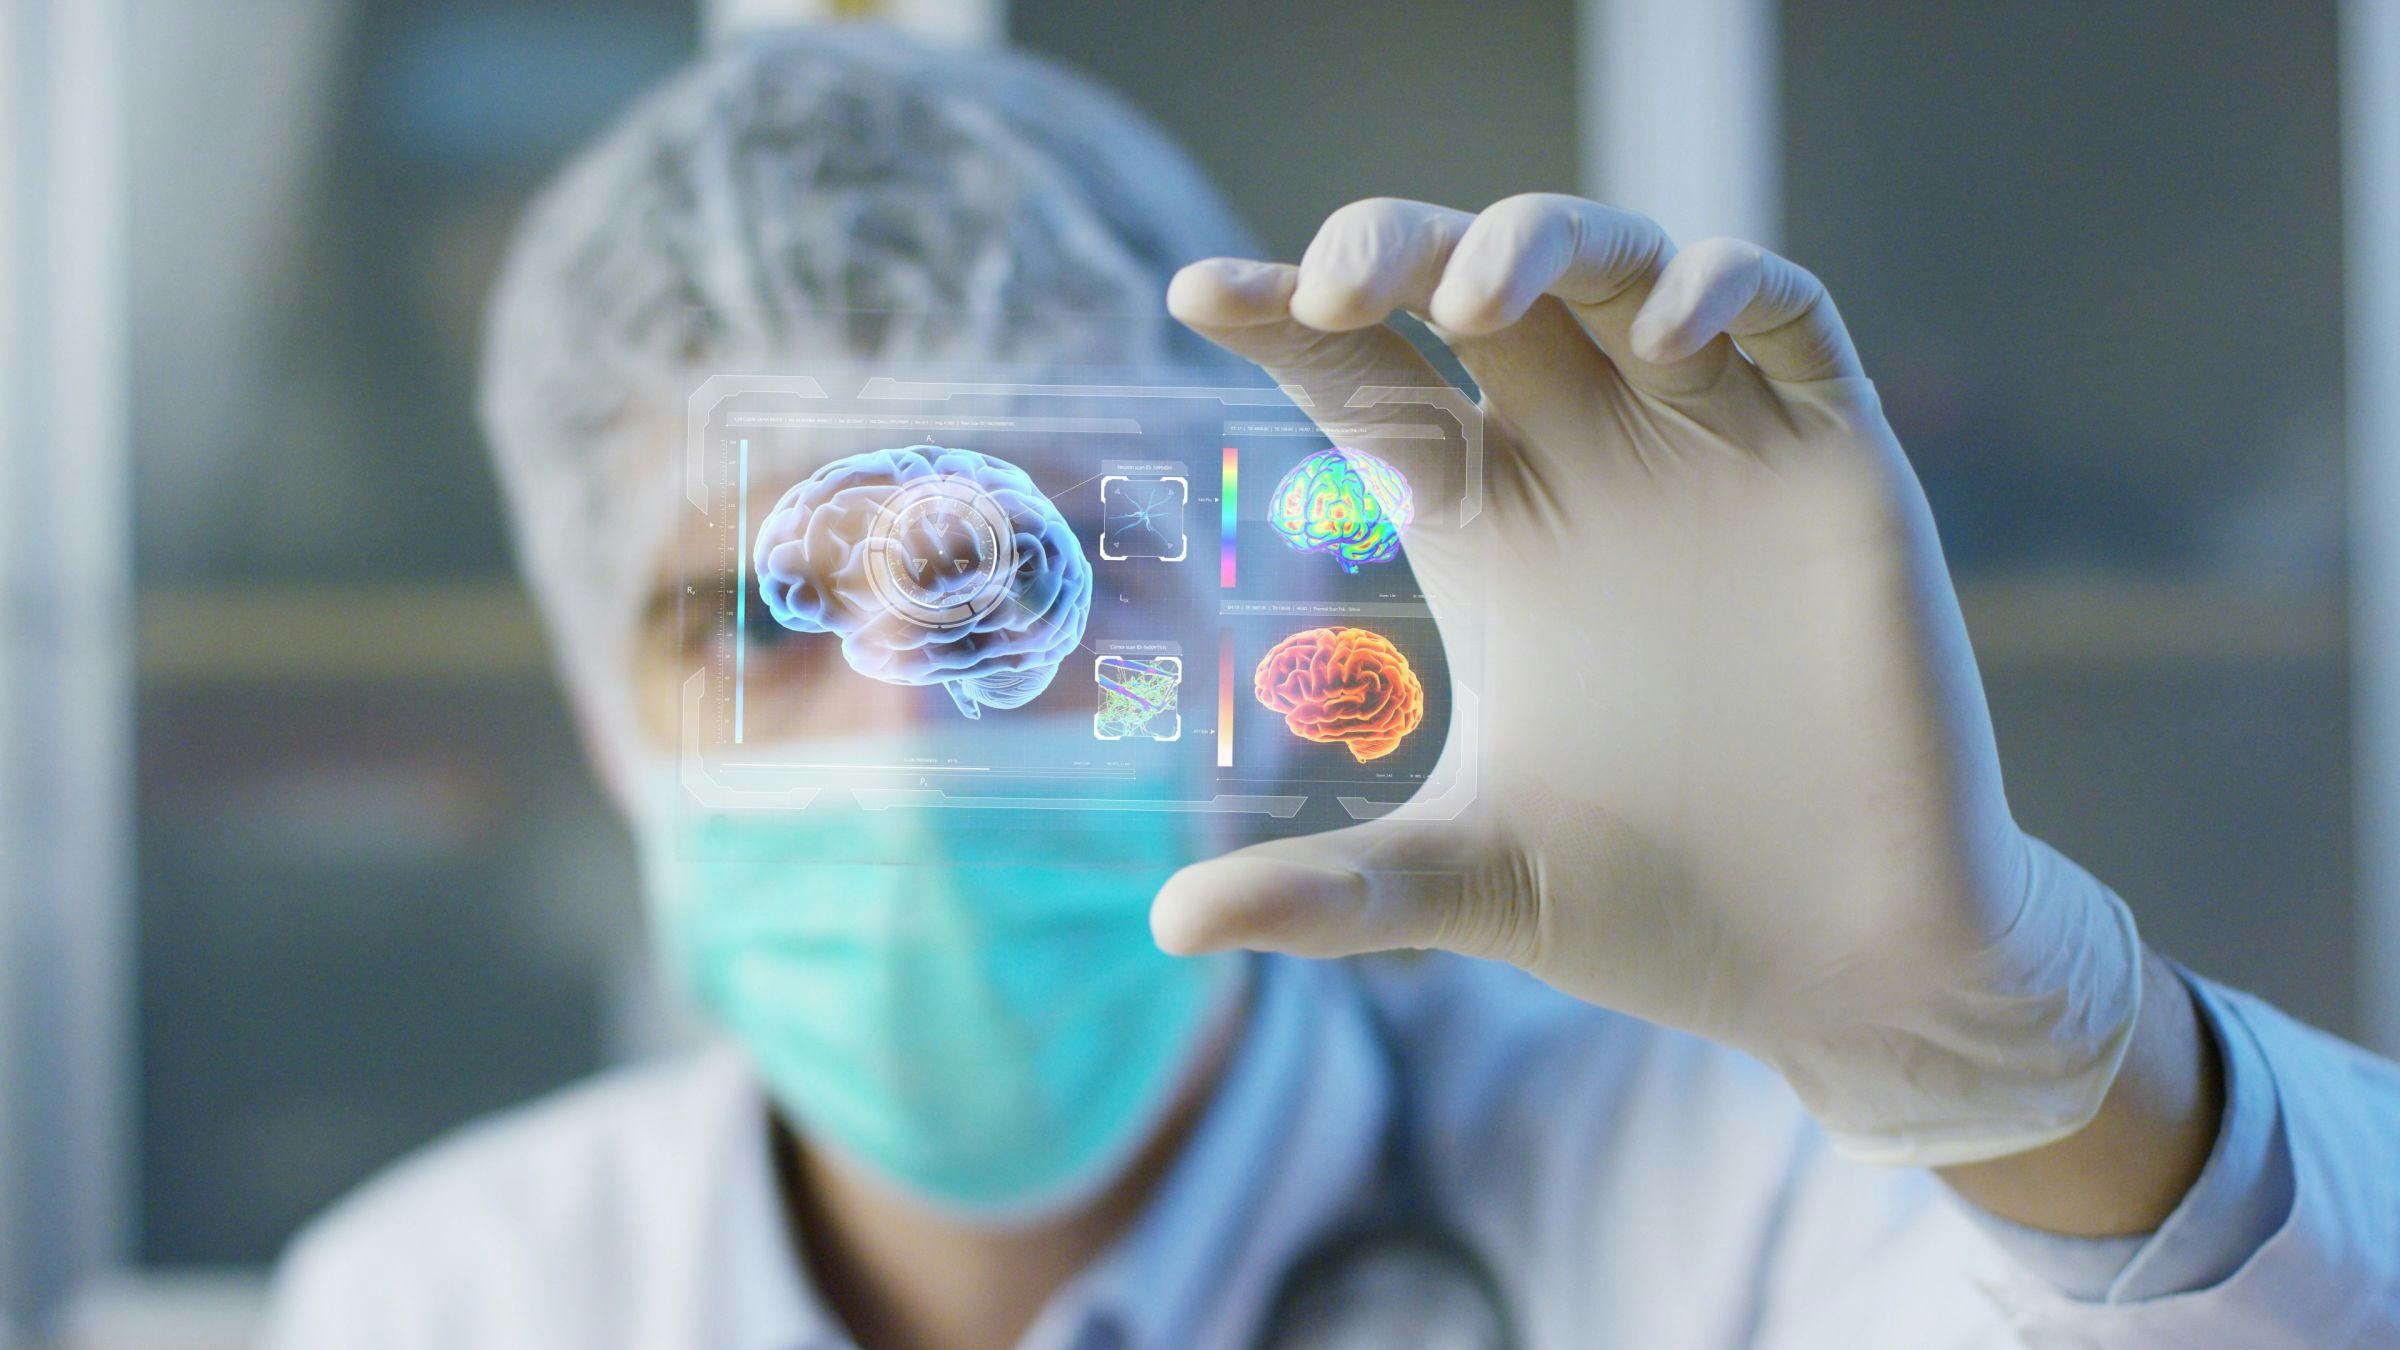 A person wearing medical equipment holding up a high-tech image of the brain